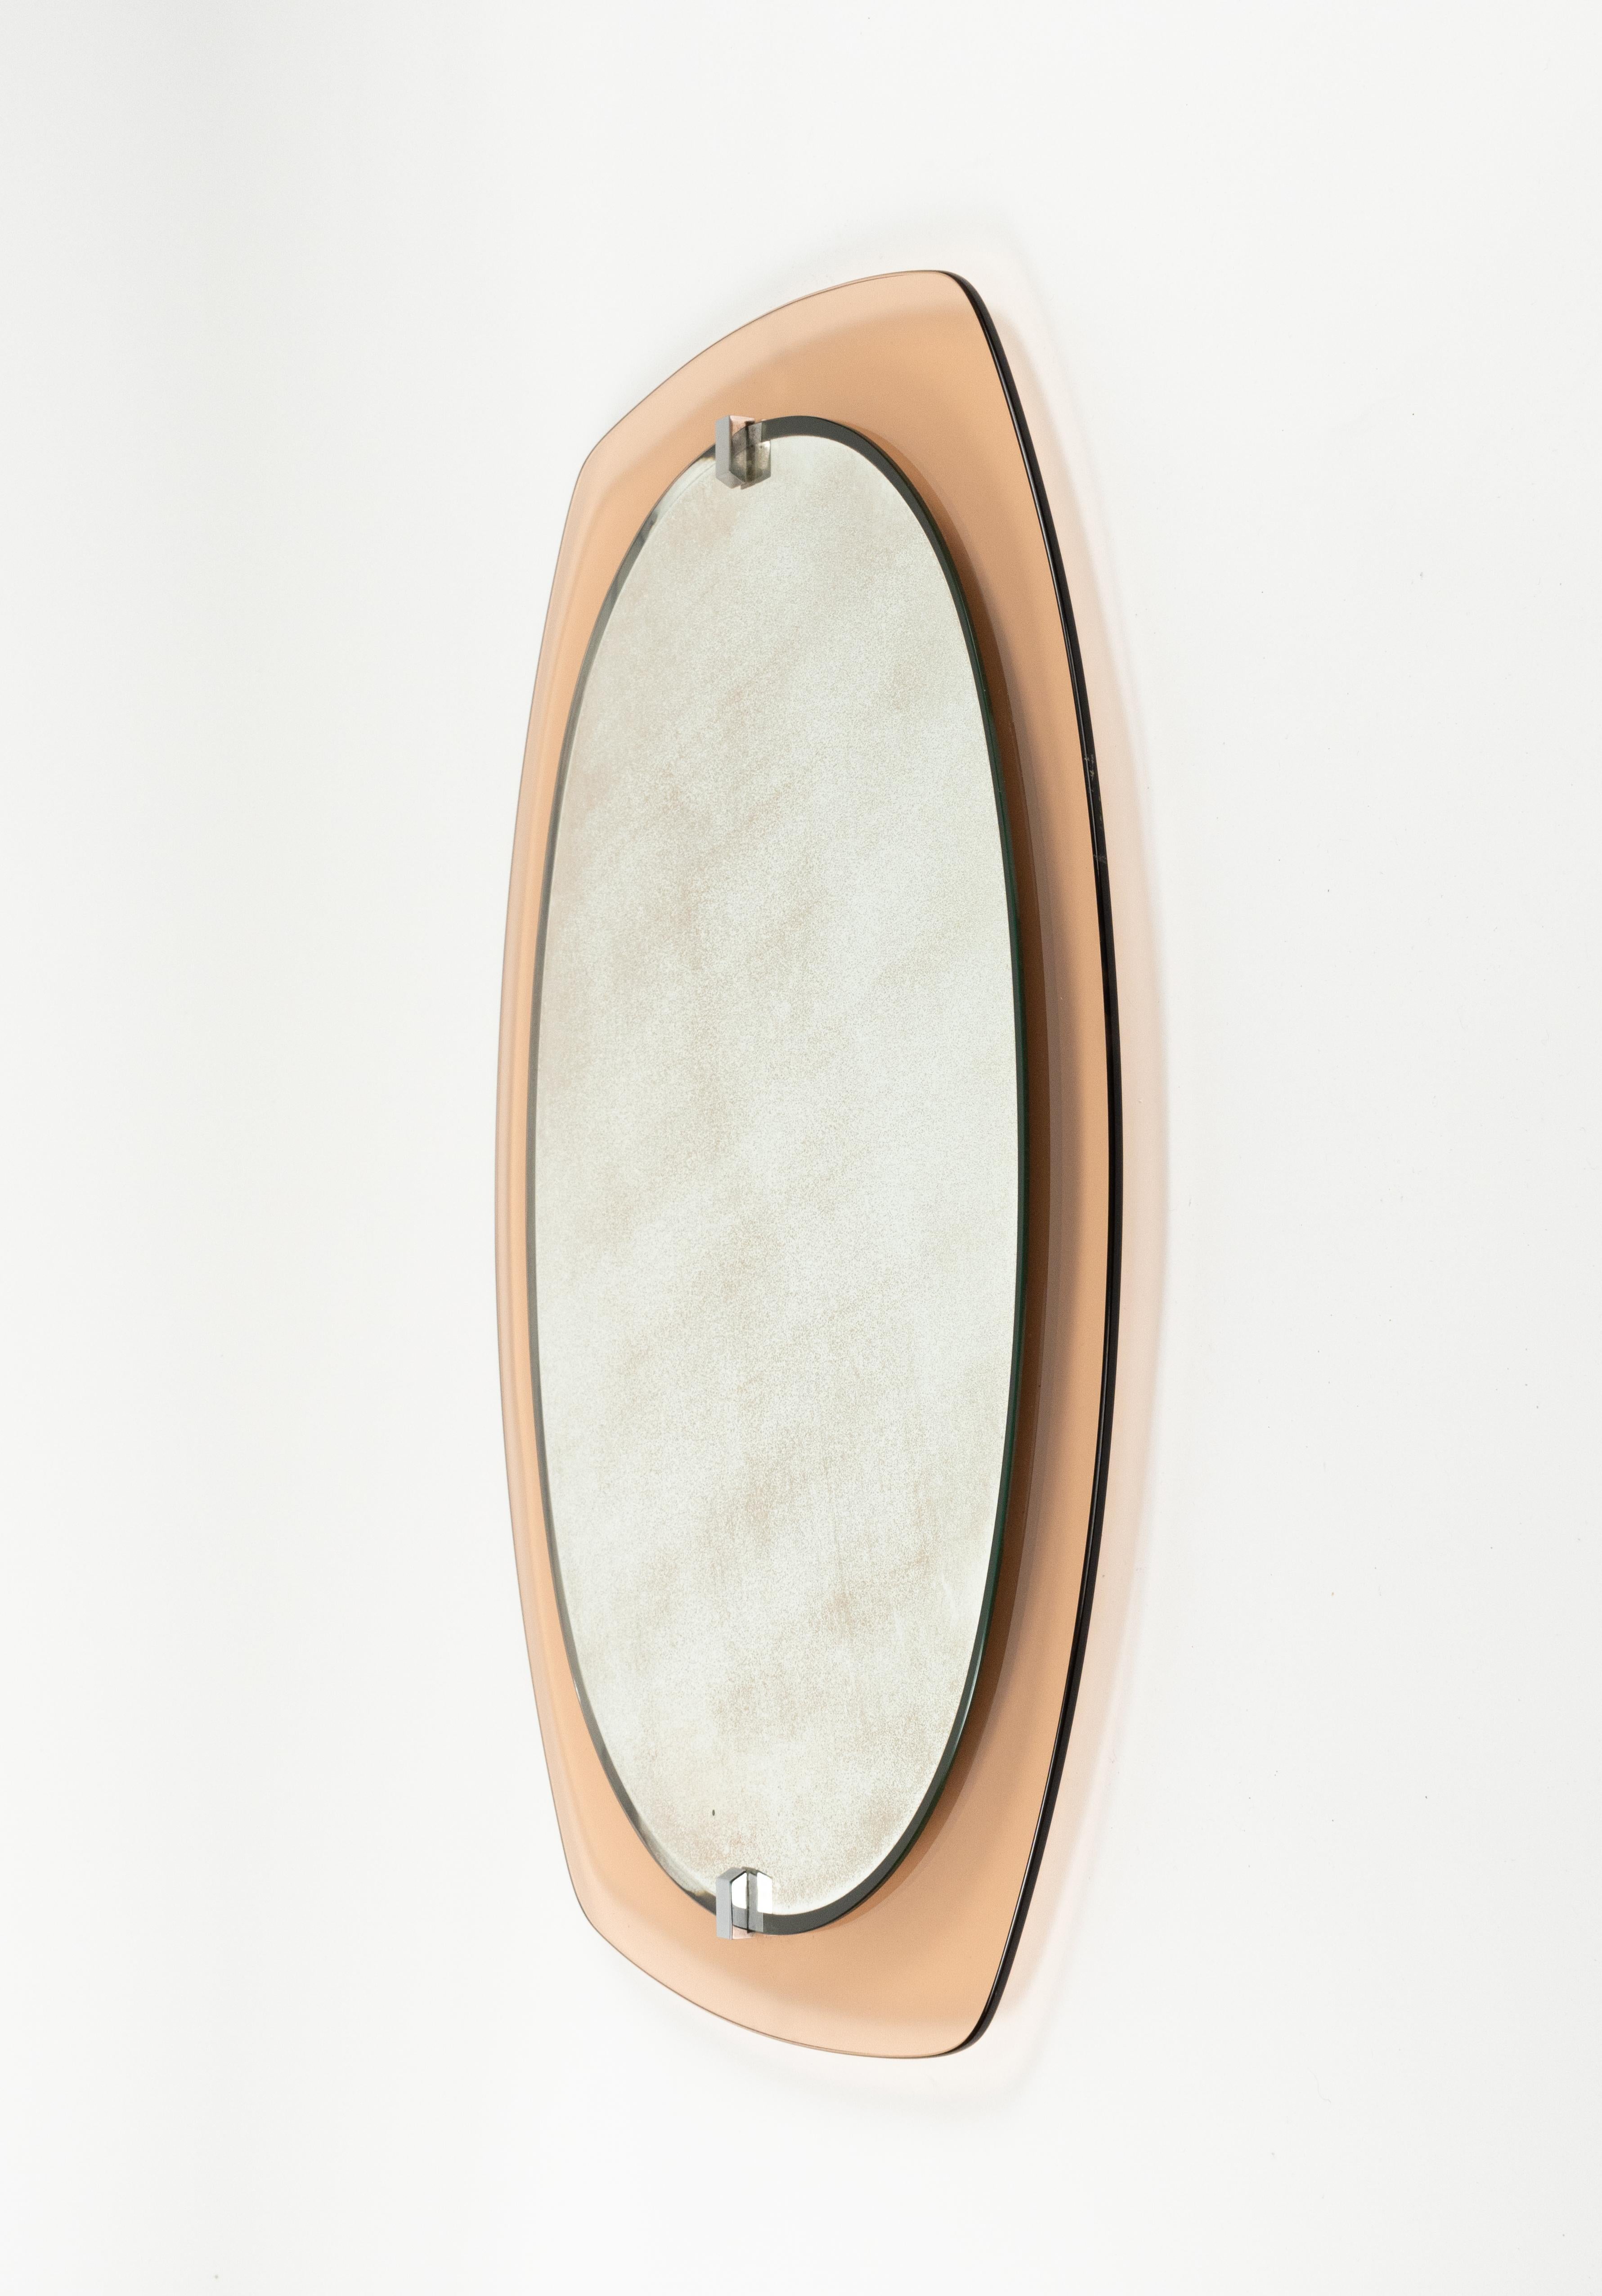 Midcentury Glass Pink Oval Wall Mirror by Veca, Italy 1970s For Sale 2